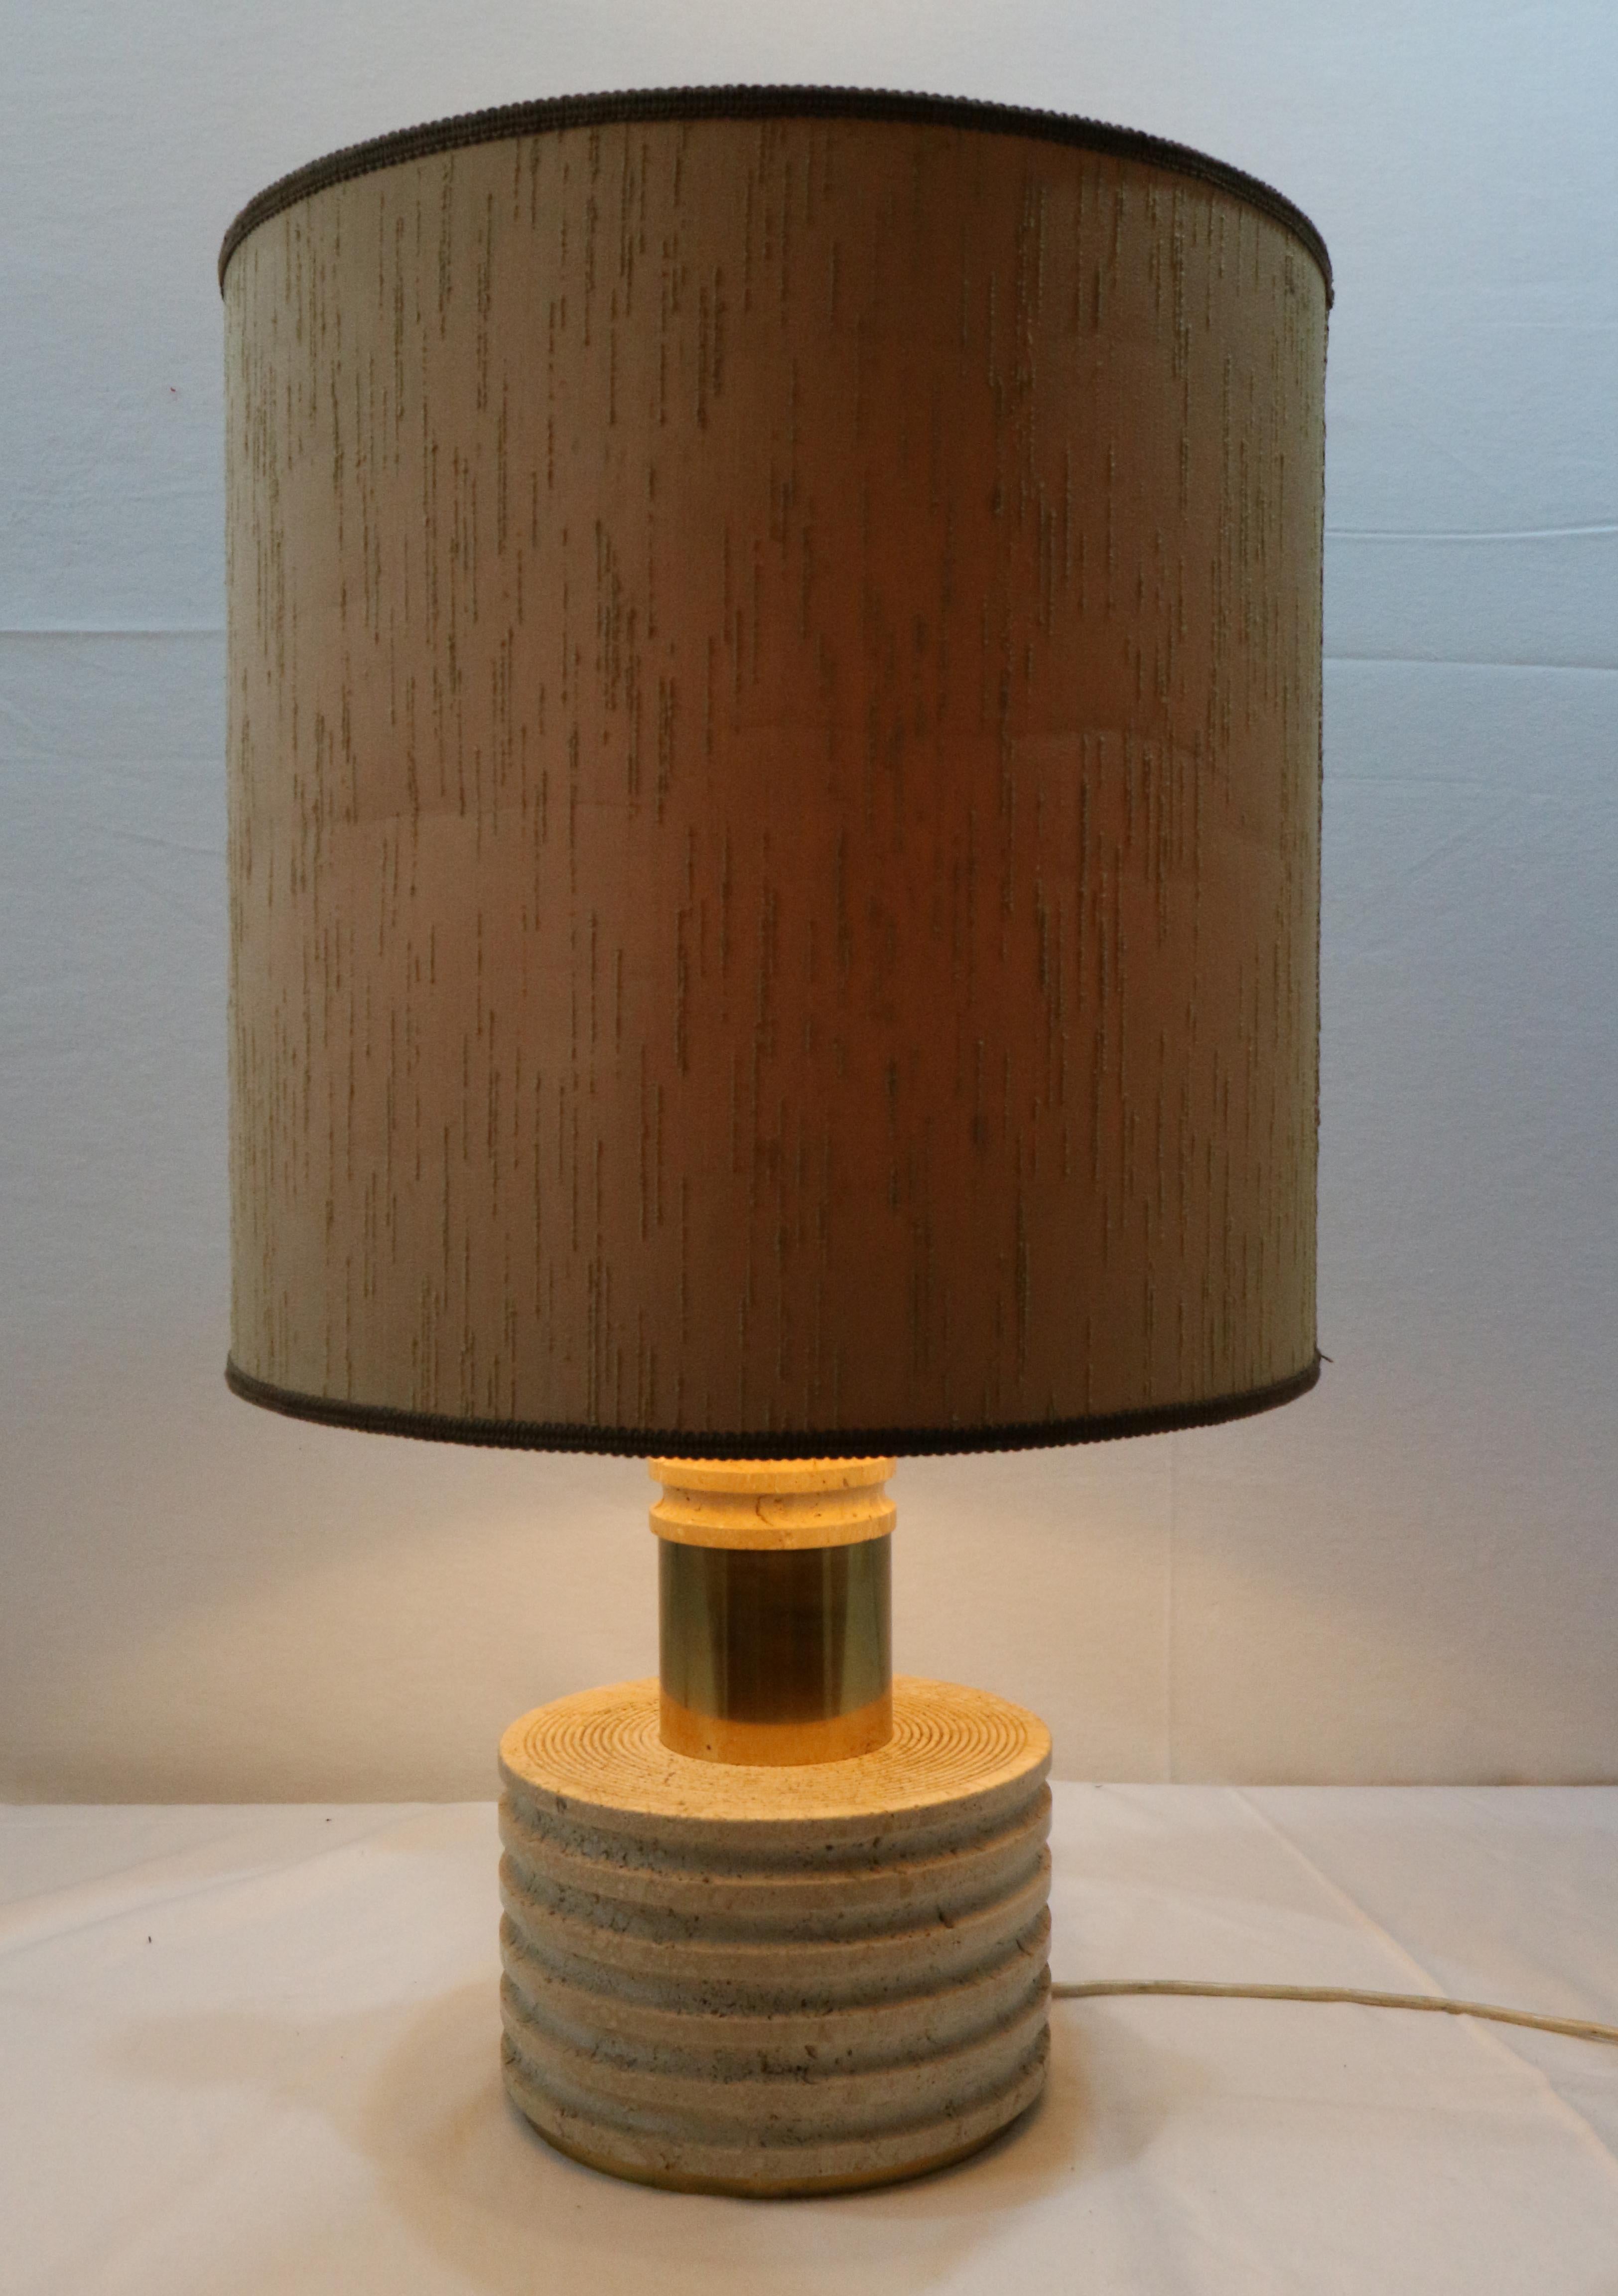 Table lamp in carved travertine.
Made with two blocks of circular shape, both carved, joined by brass elements.
It presents the manufacturer's label under the base (see photo in detail).
Produced in Italy around 1970.
Measure space of